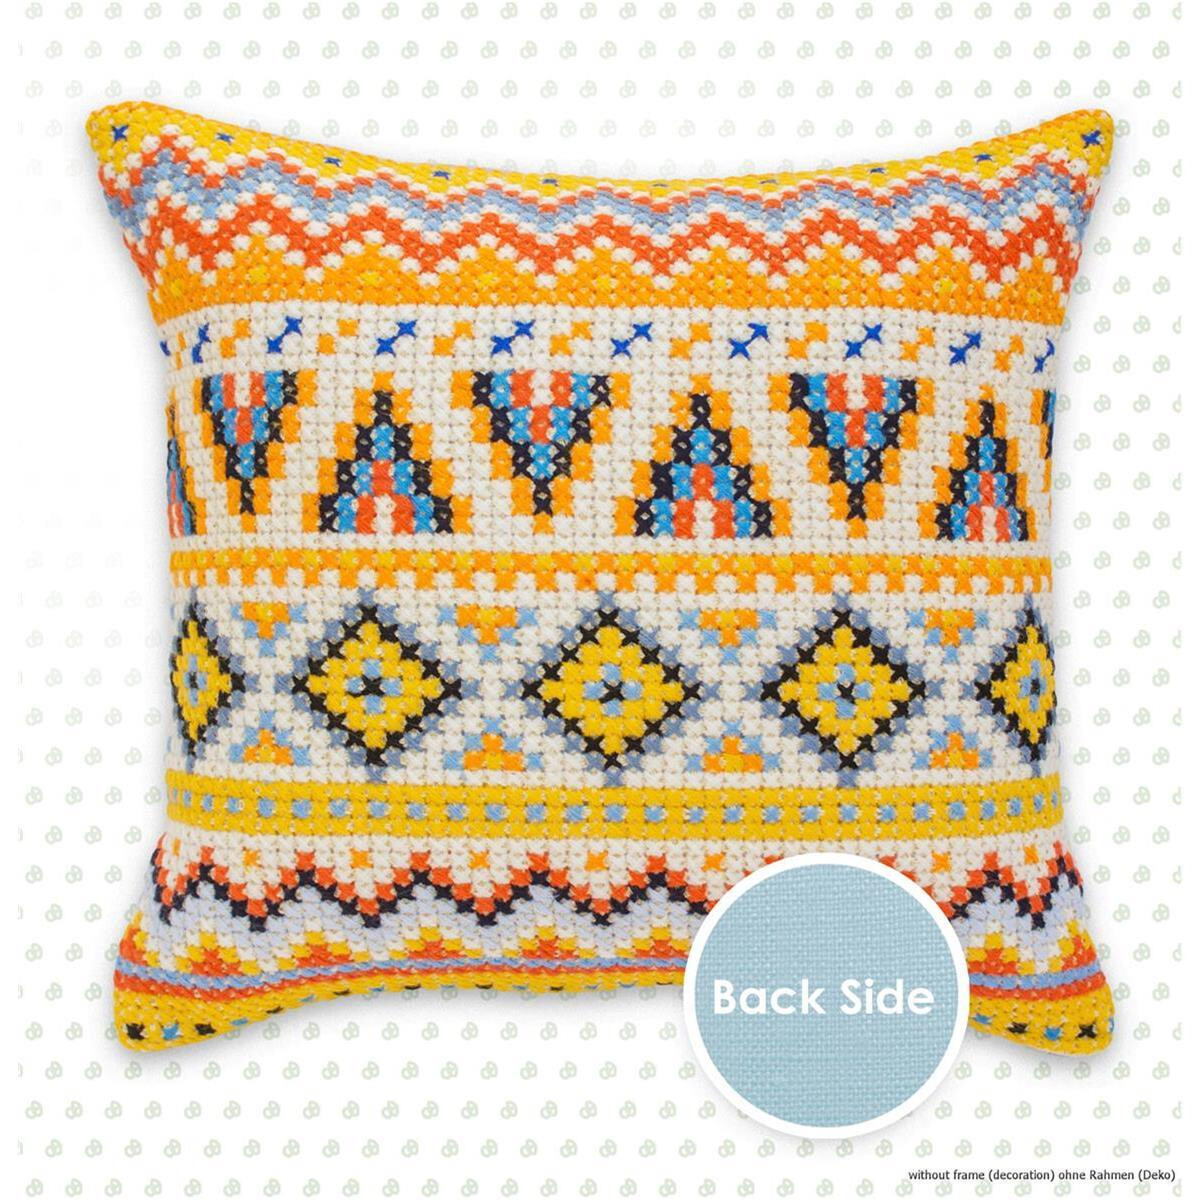 A square cushion with colorful geometric embroidery,...